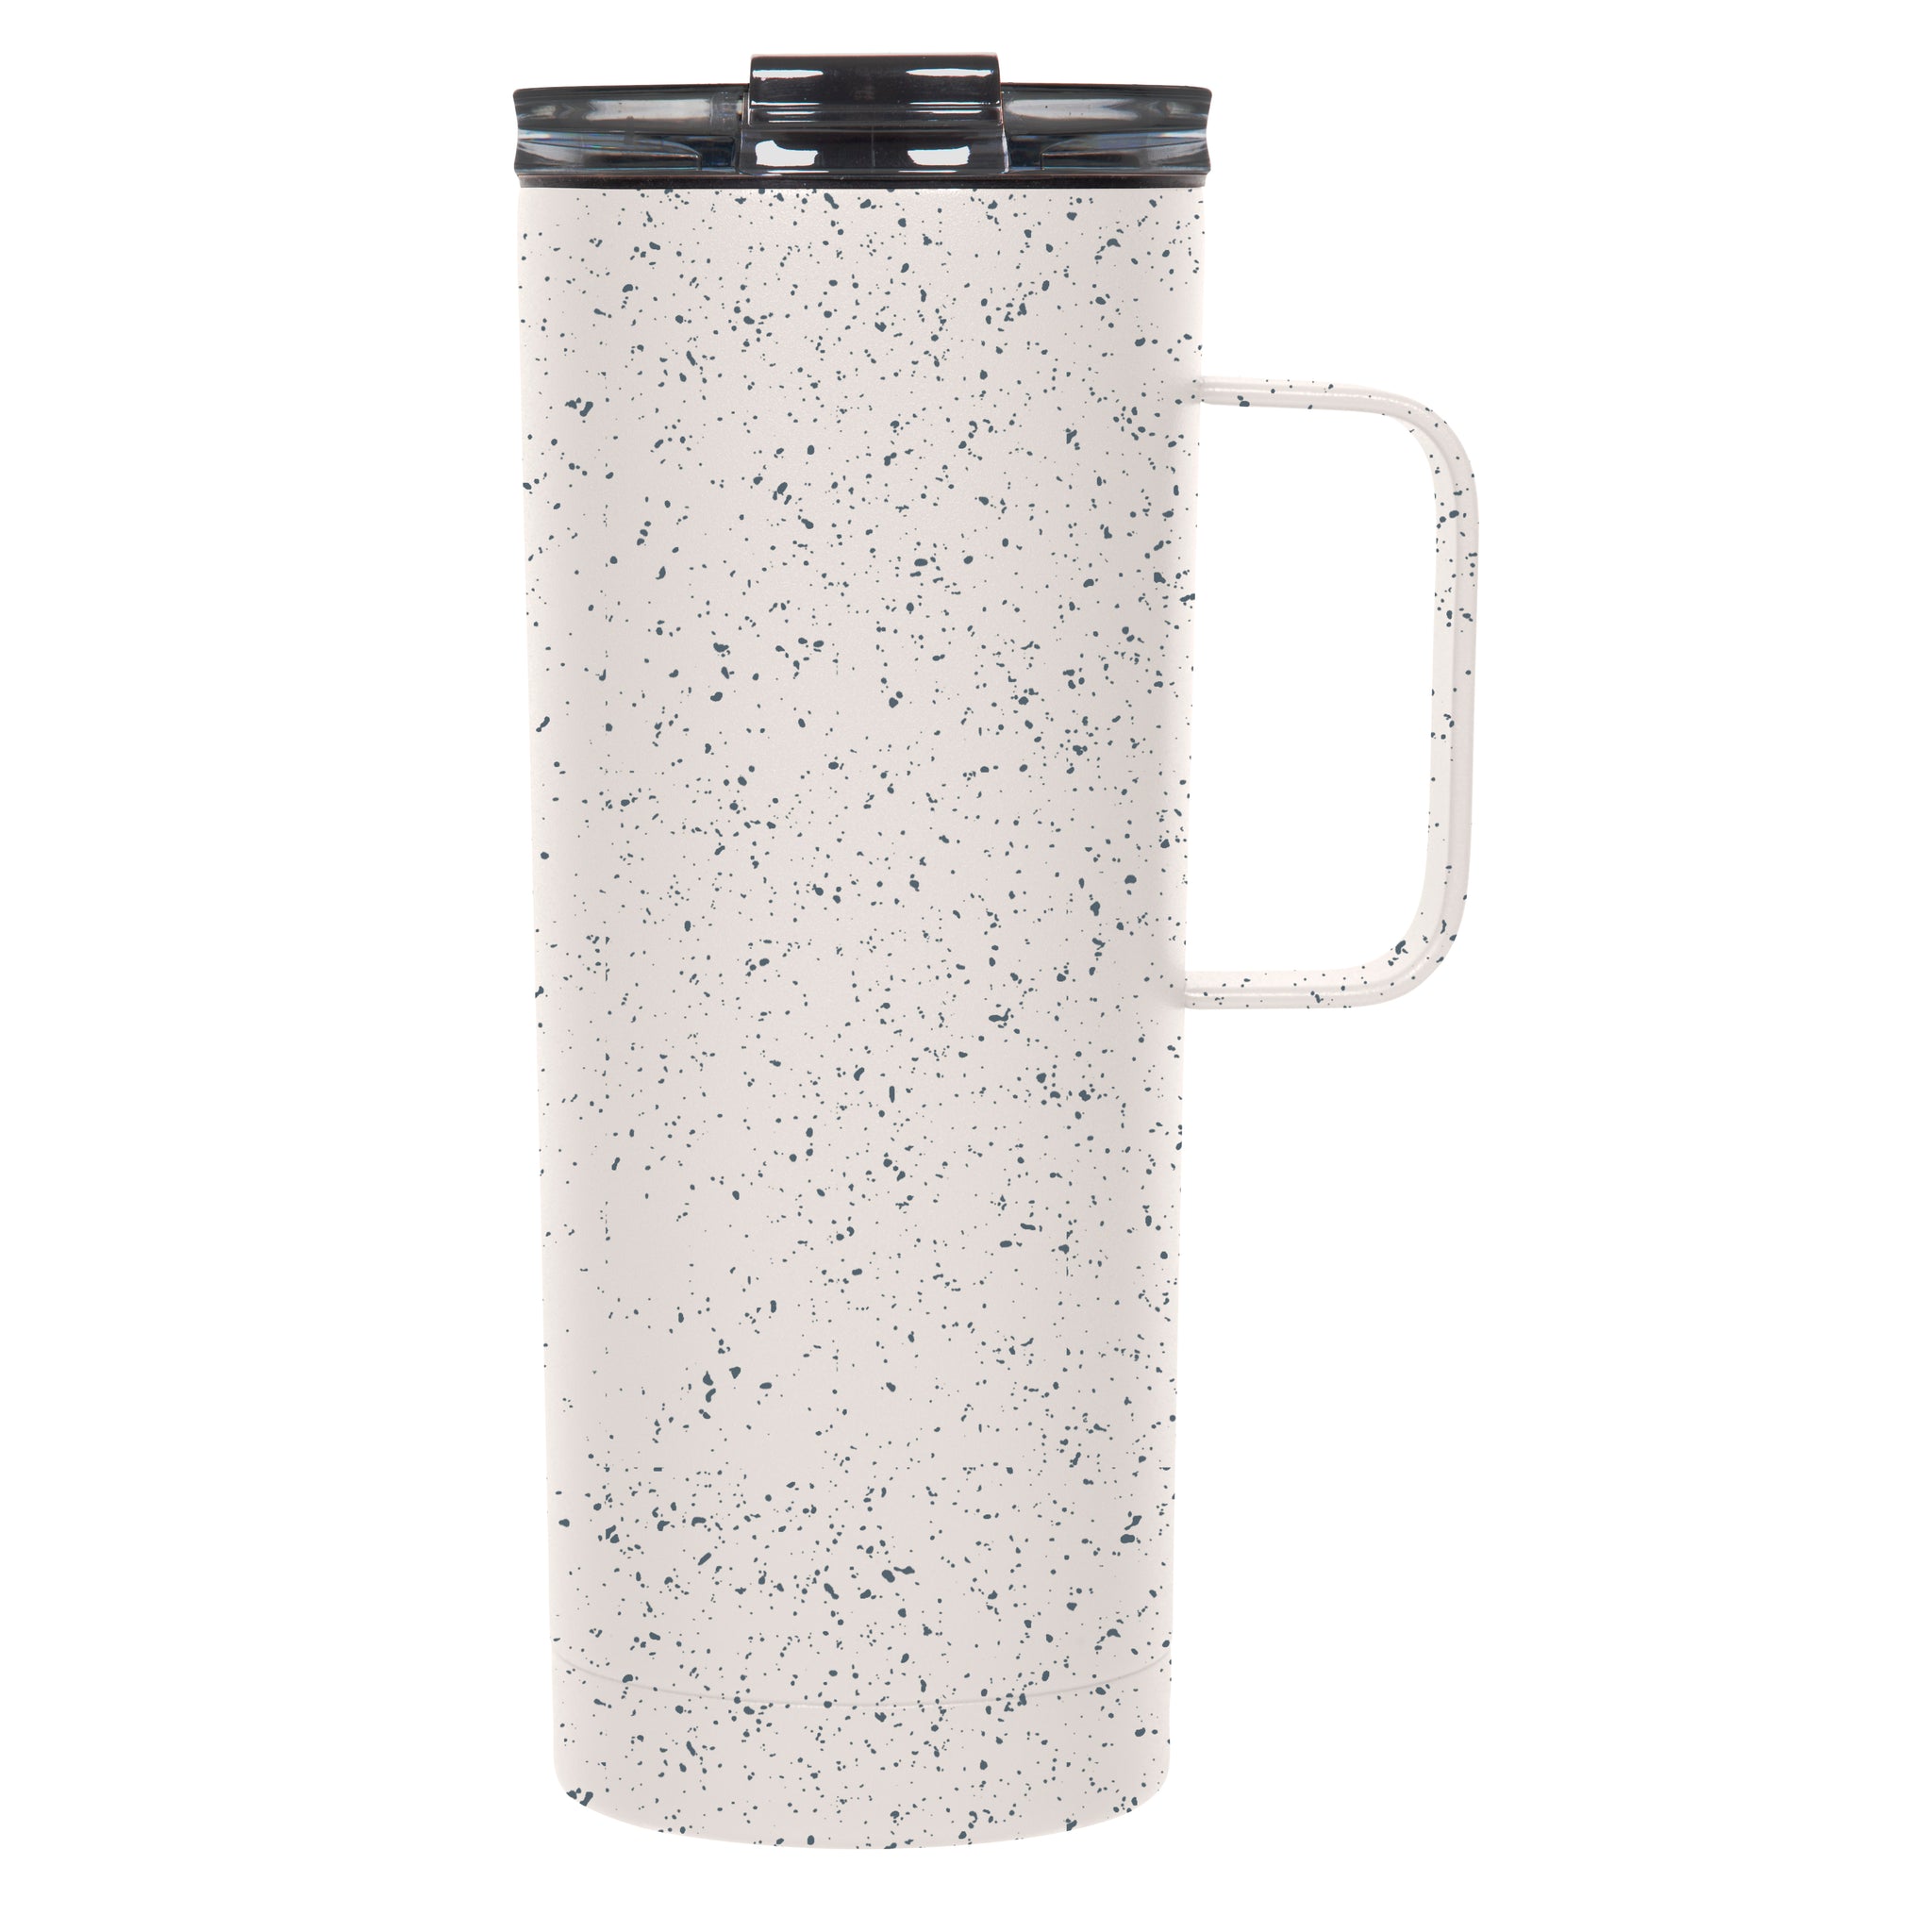 20oz Tall Mug with Flip Lid– FIFTY/FIFTY Bottles